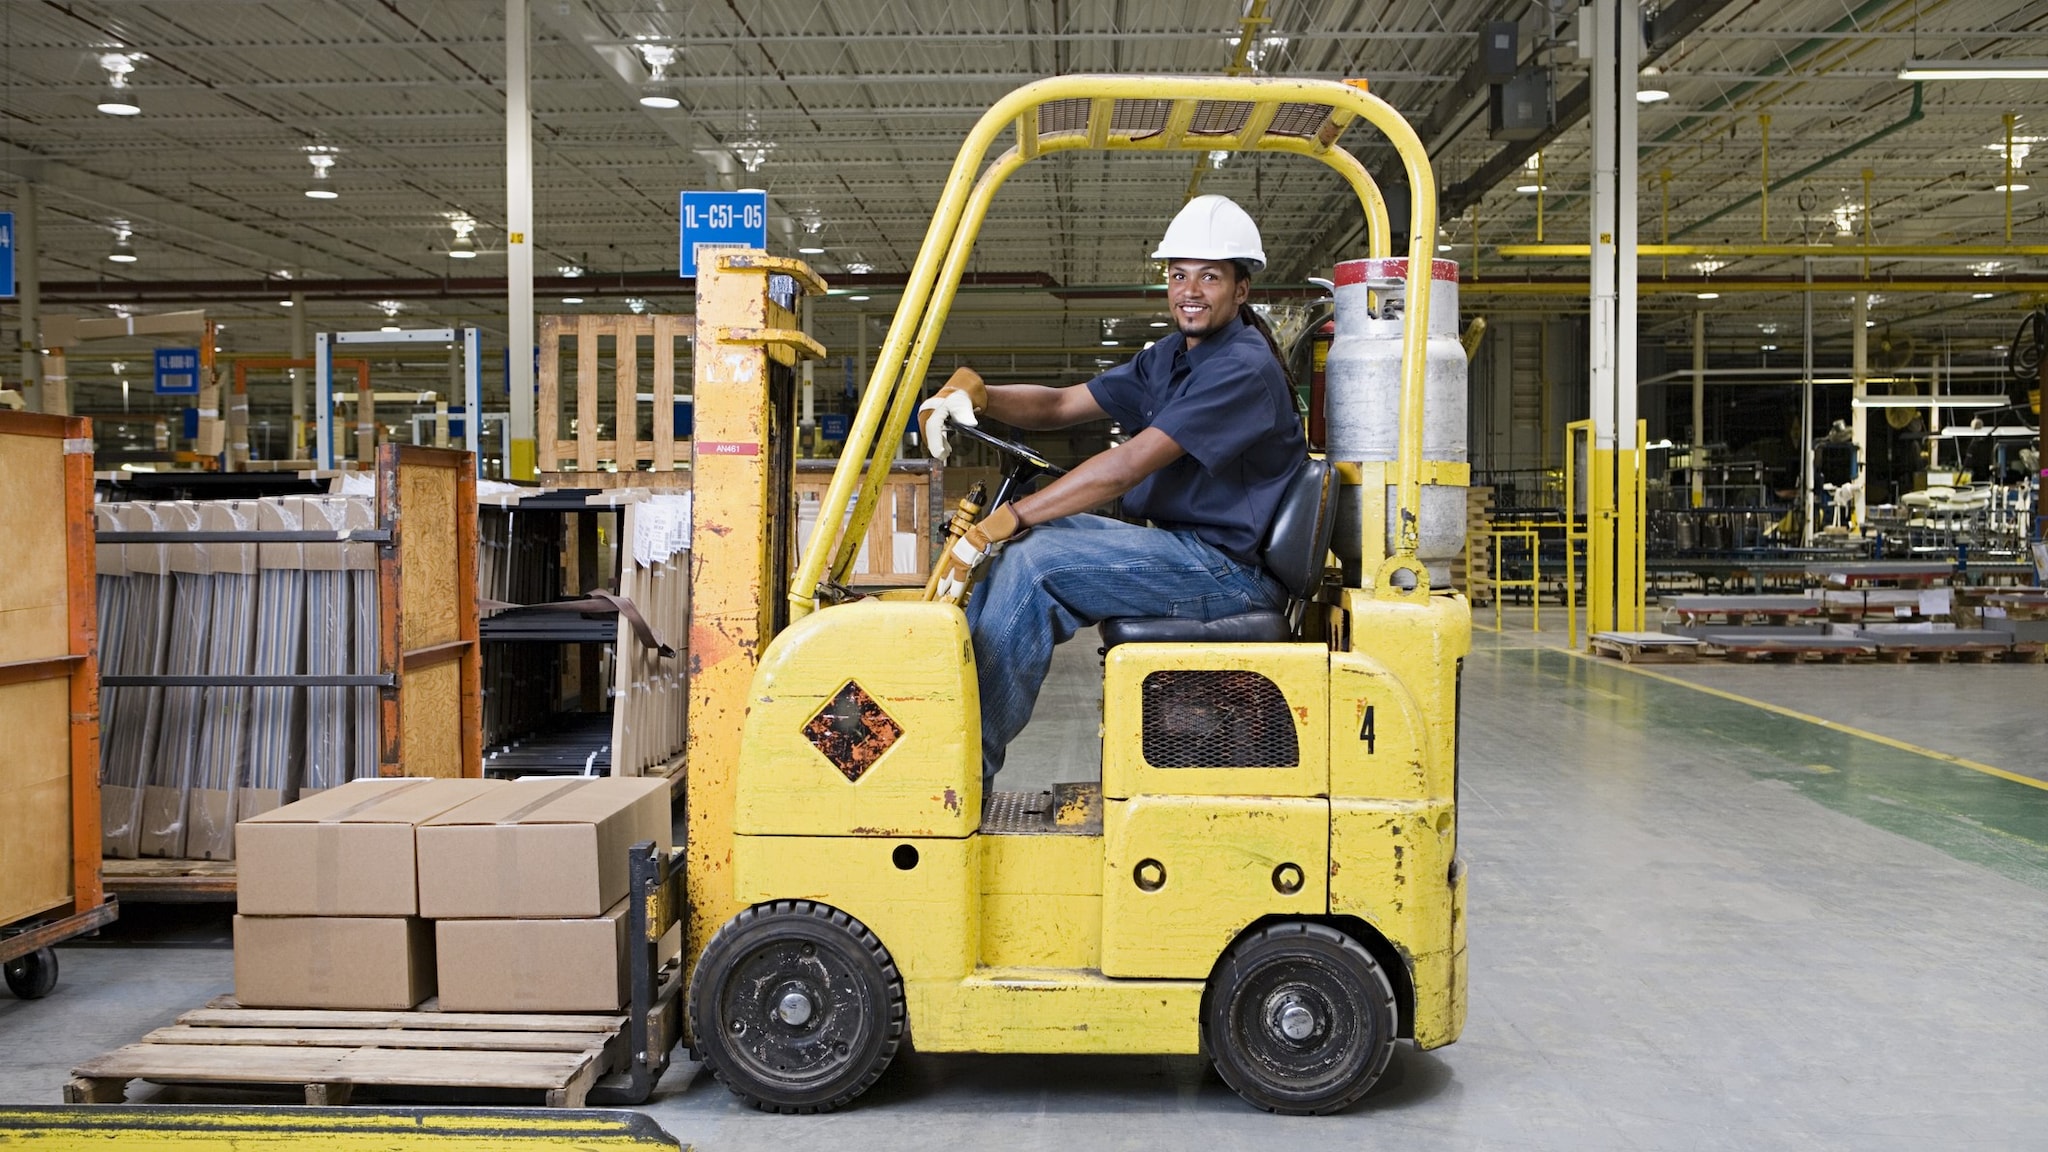 A man sits in a forklift in a well-lit warehouse.